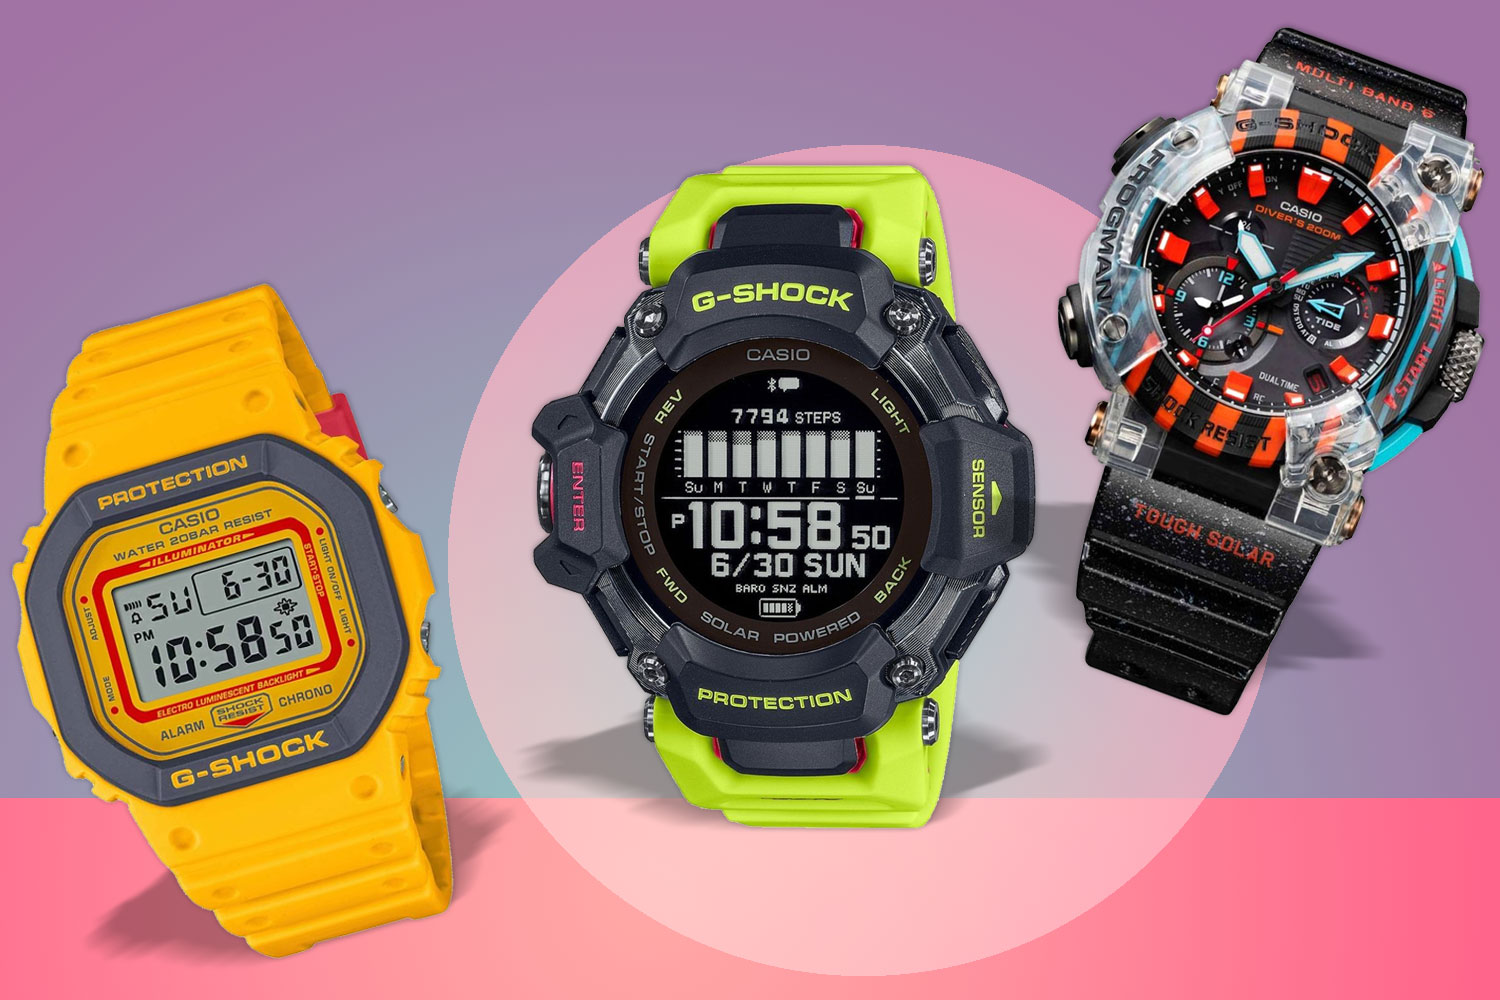 The Toughest G-Shock Watches